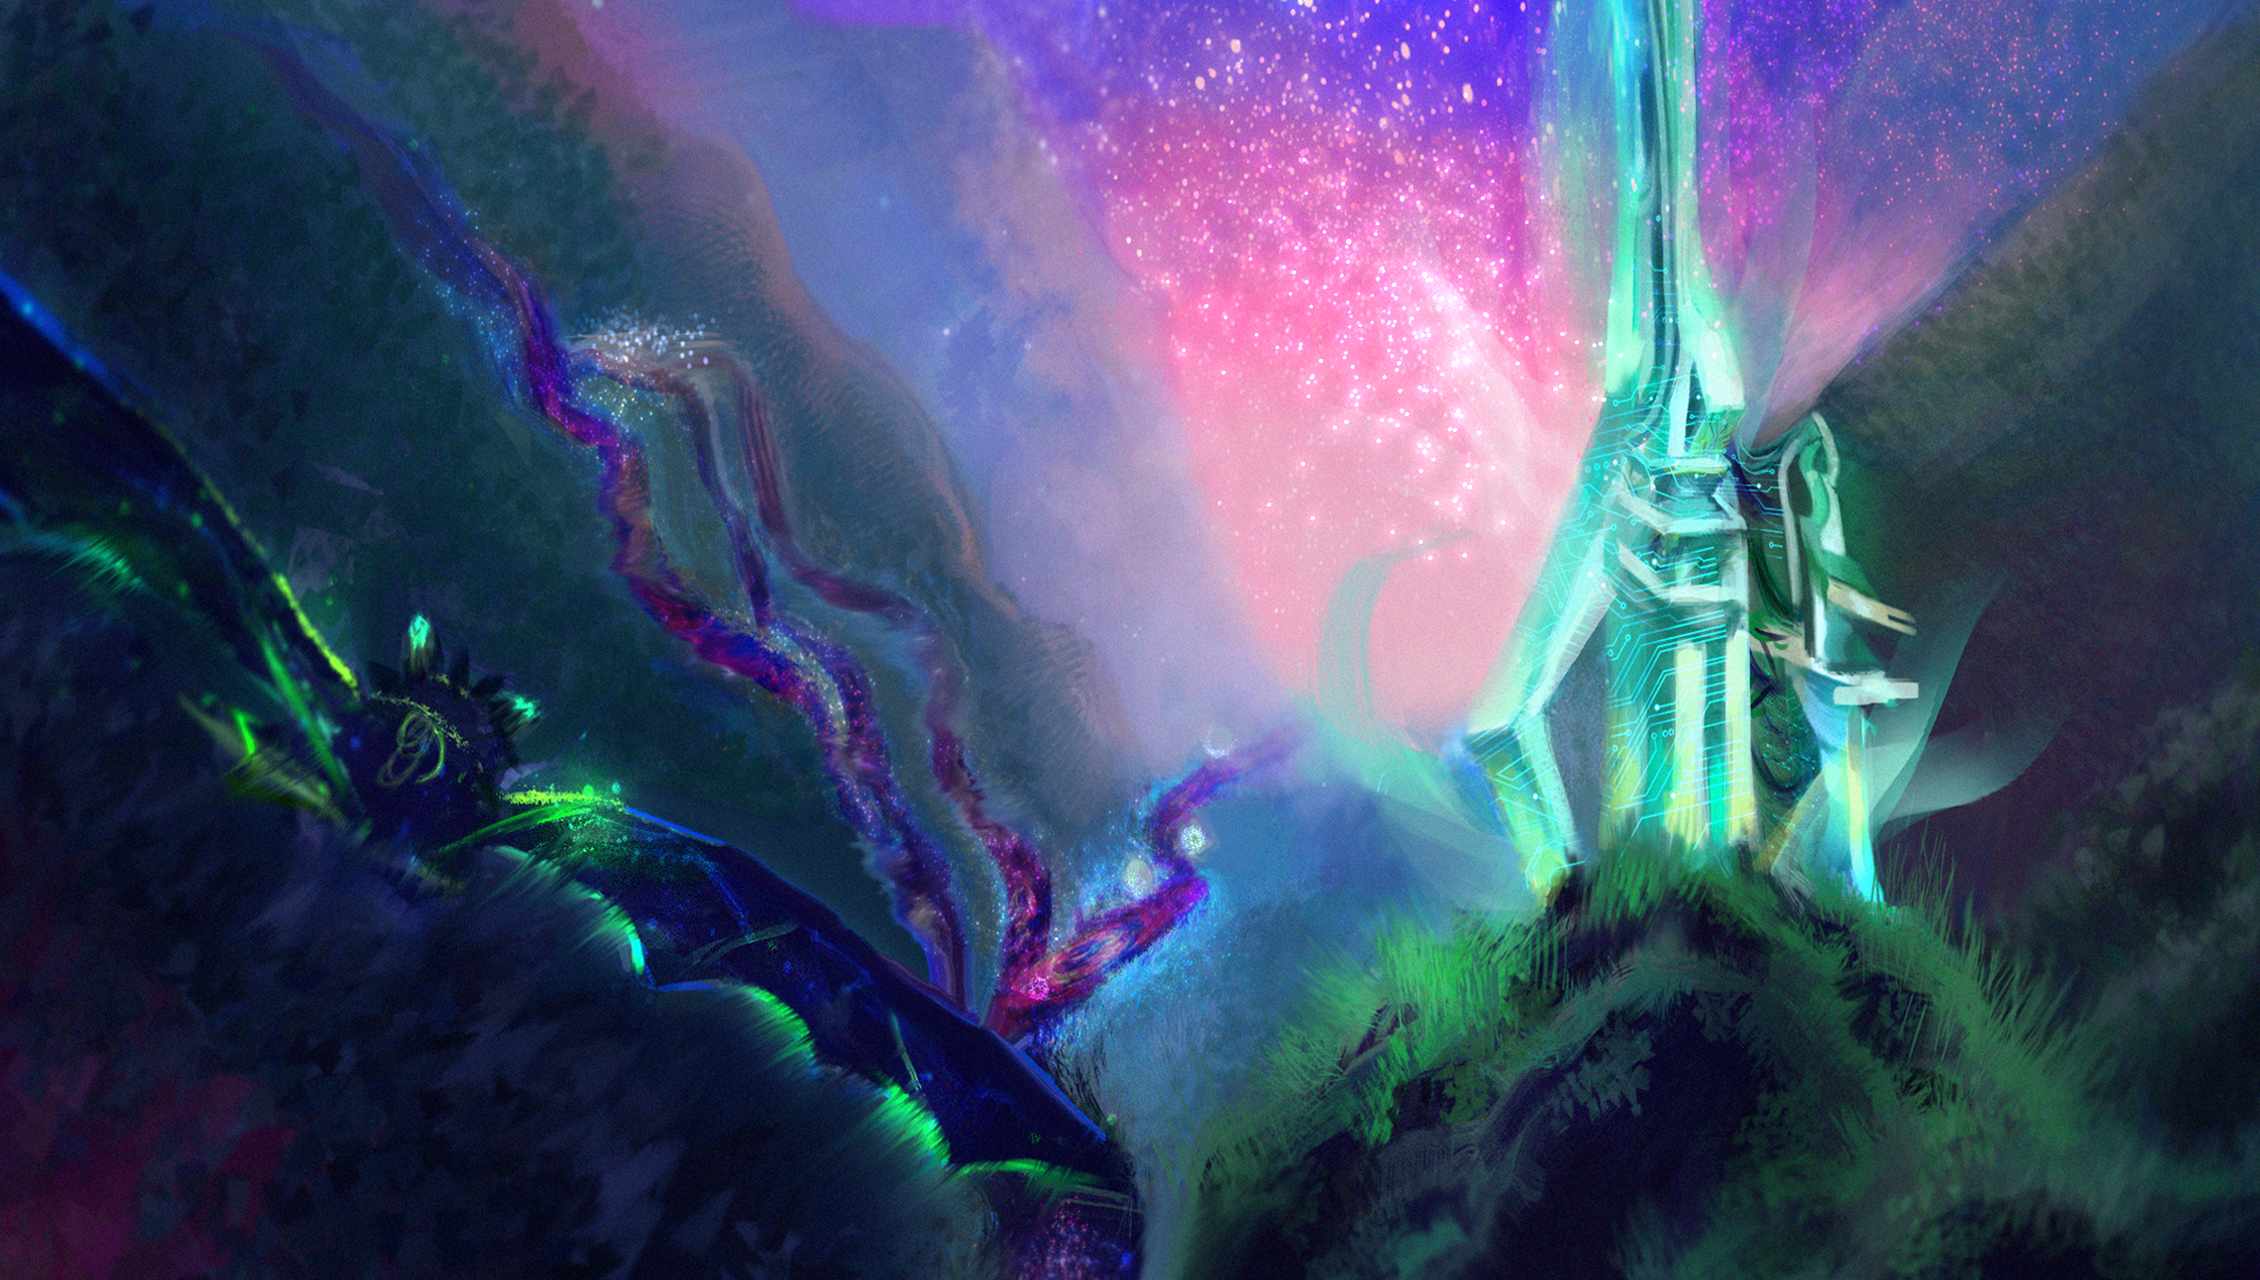 a painted piece of a blue green crystal tower in a valley. there's a stream off to the side that looks like it contains some sort of starry liquid, with planet like bubbles coming out. on the left side of the frame, there's a dragon with blue and green glowing markings